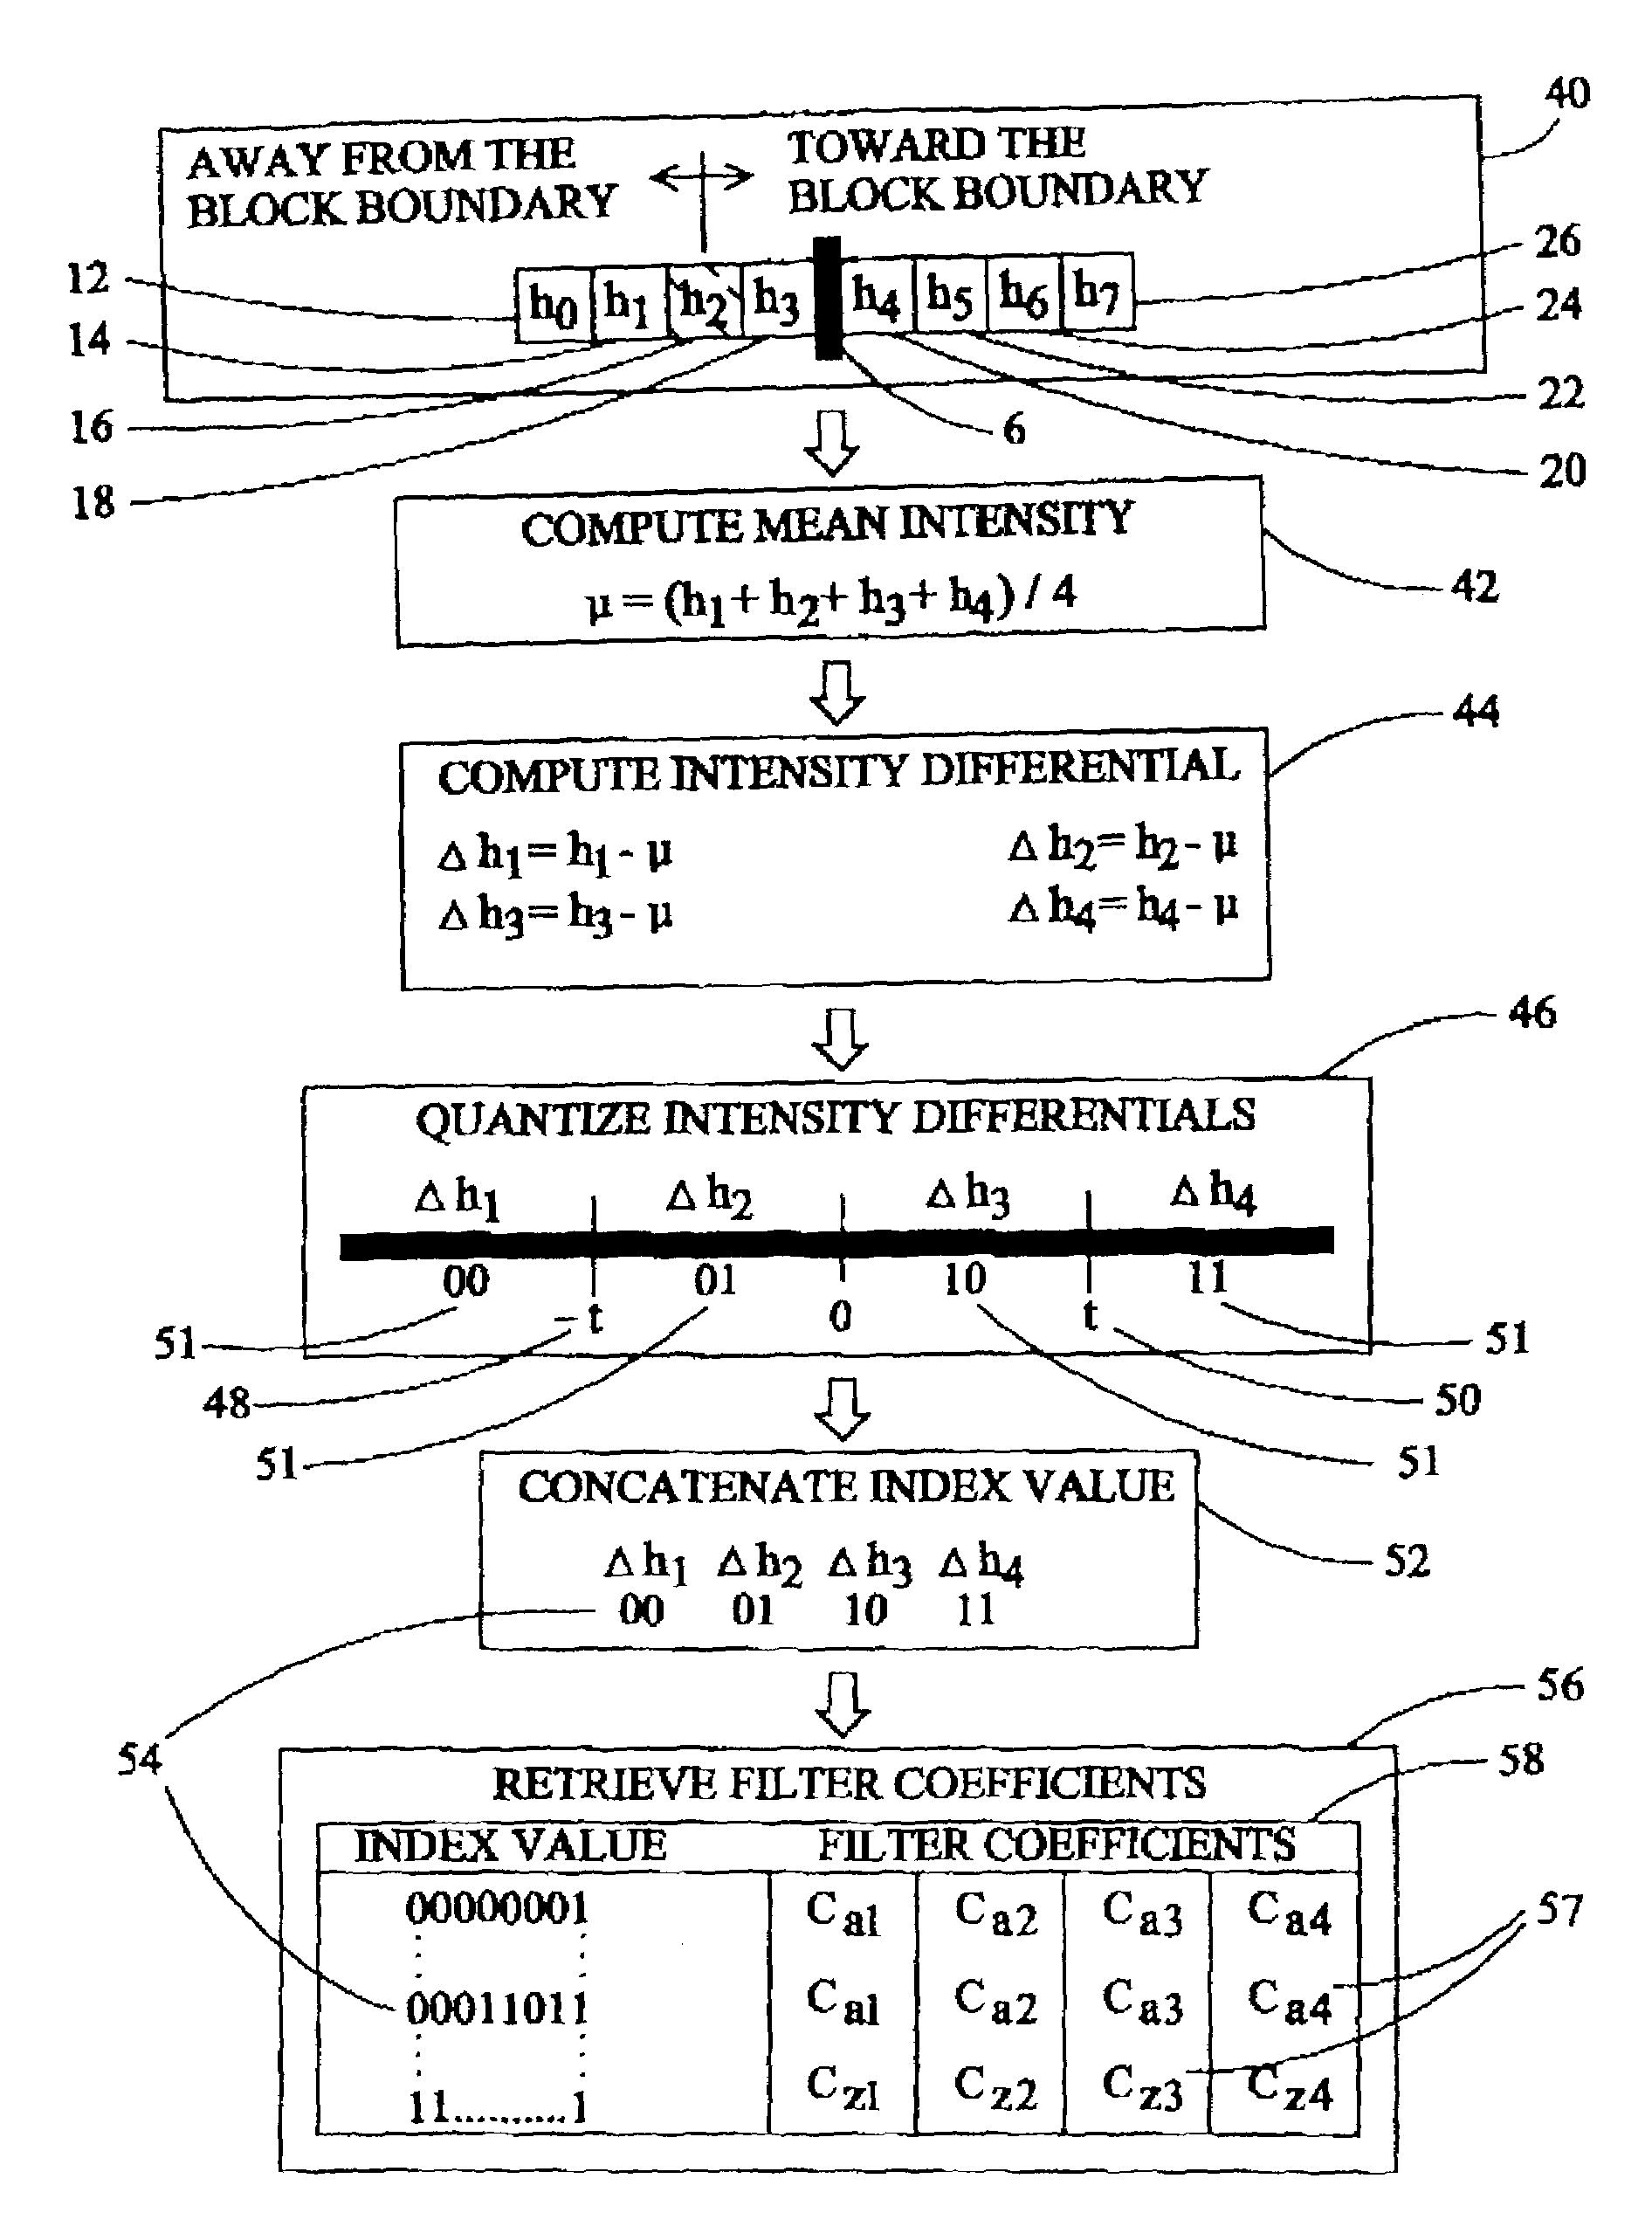 Block boundary artifact reduction for block-based image compression